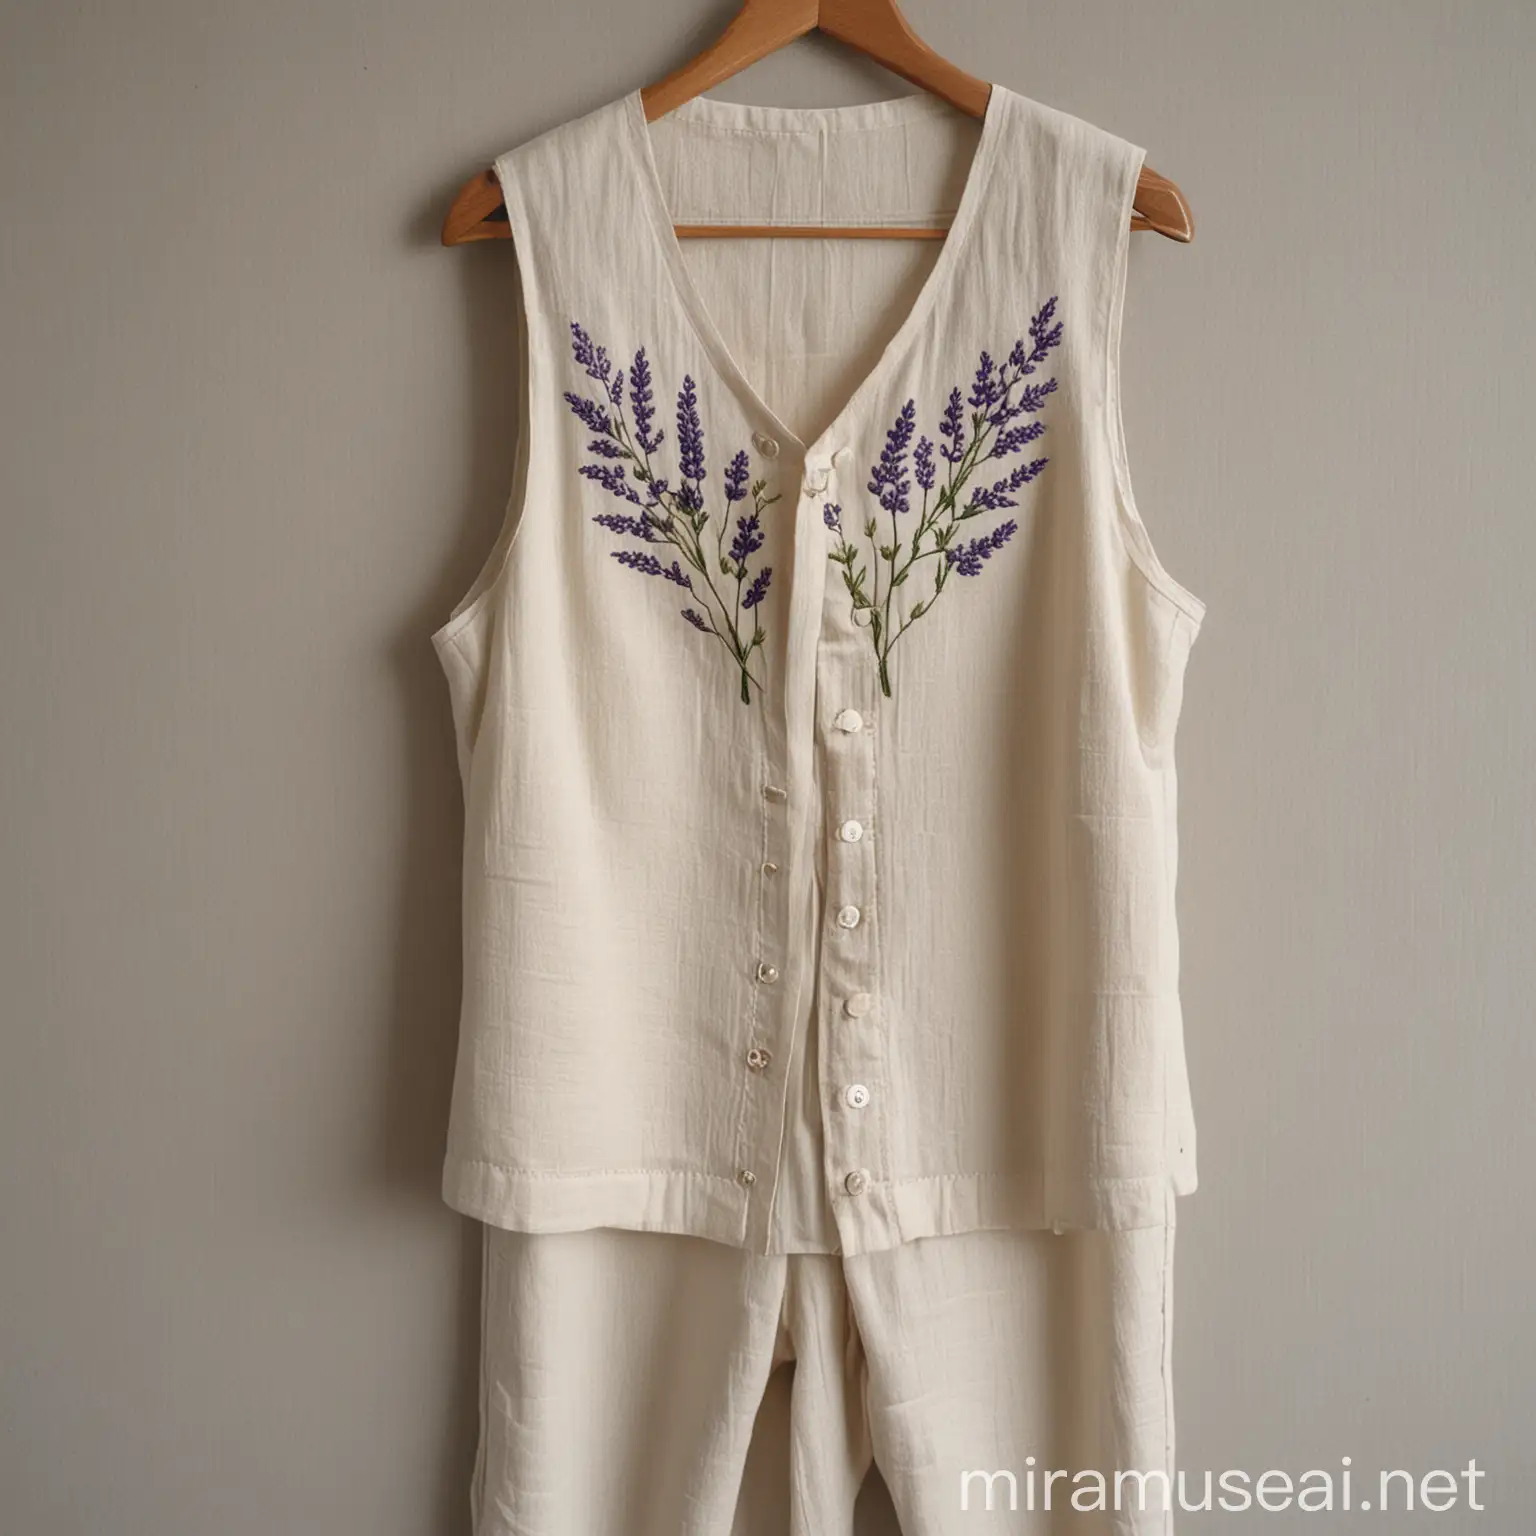 Elegant Cream Linen Womens Outfit with Lavender Embroidery